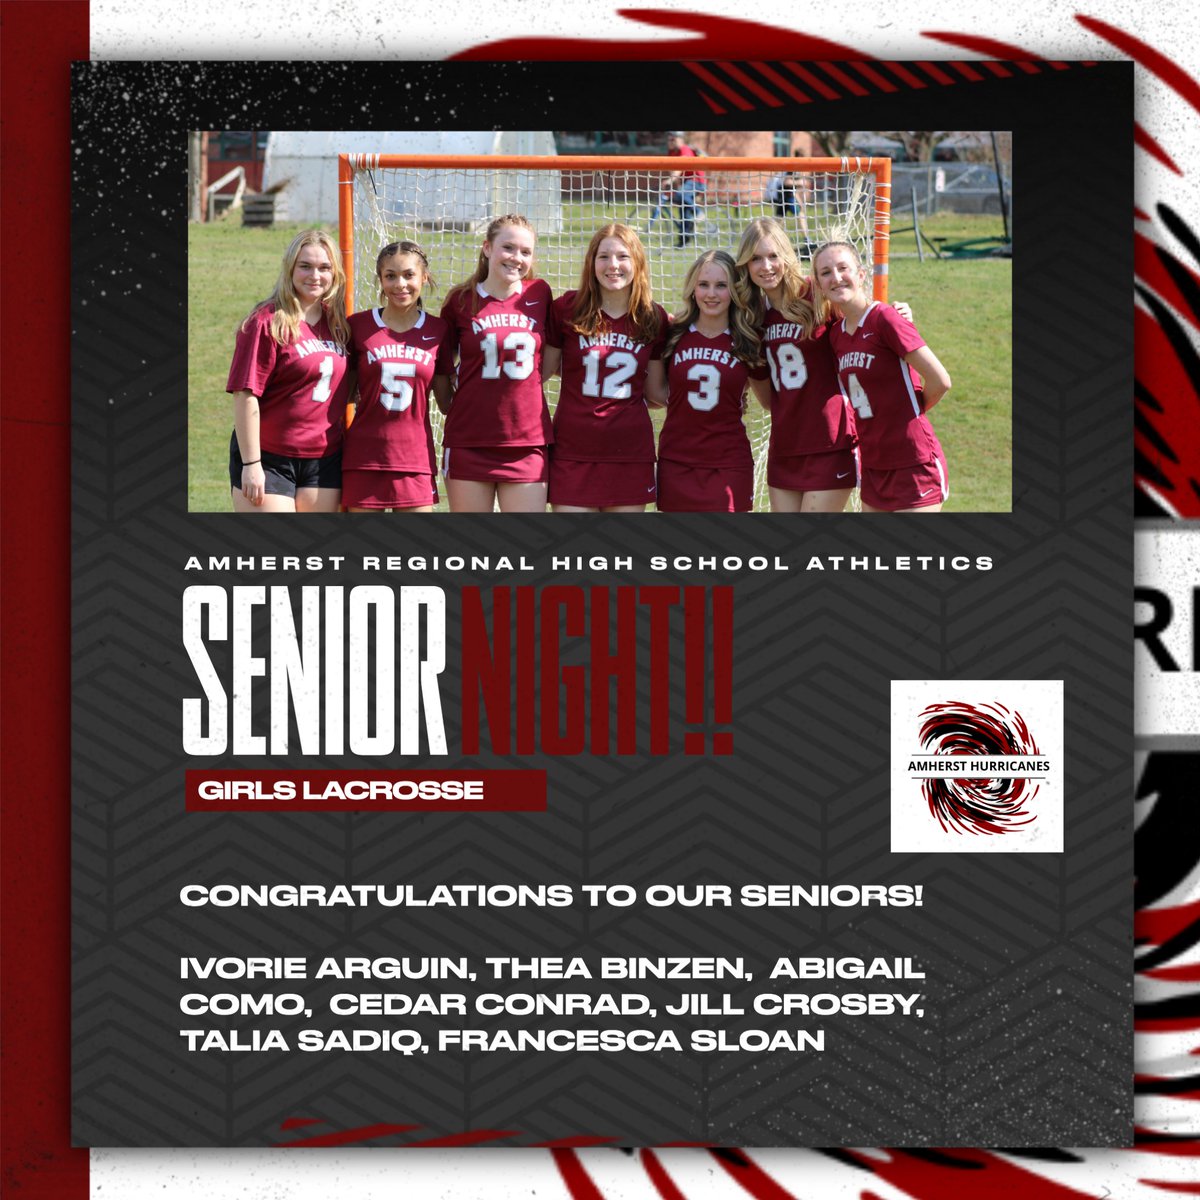 It's Senior Night for the Girls Lacrosse team! Come out and support the team at 7:00PM! #Classof2024